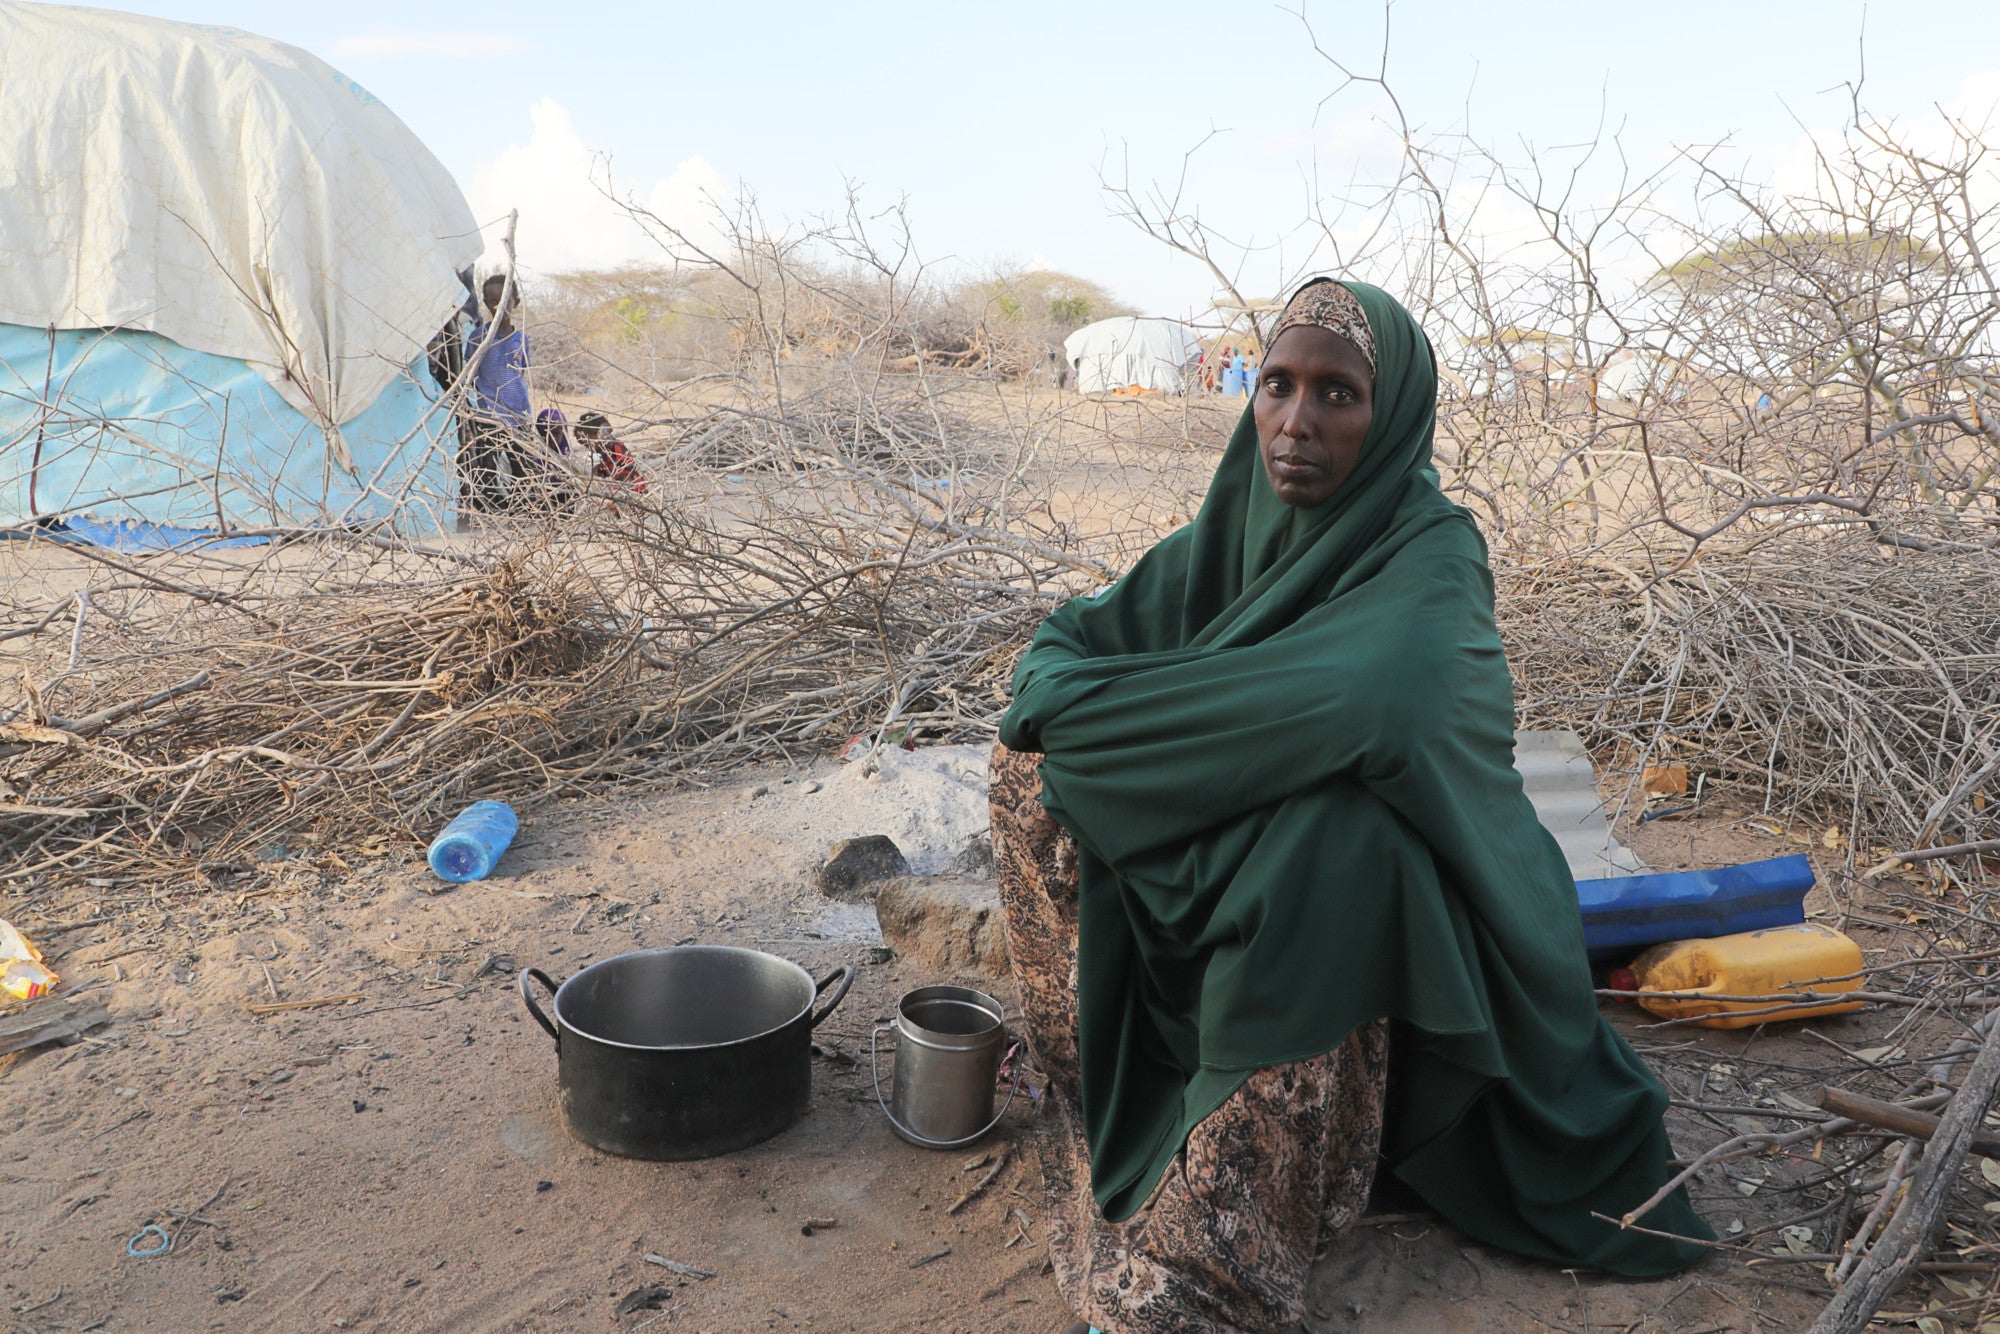 Portrait of Somali woman outdoors, with cooking pots.